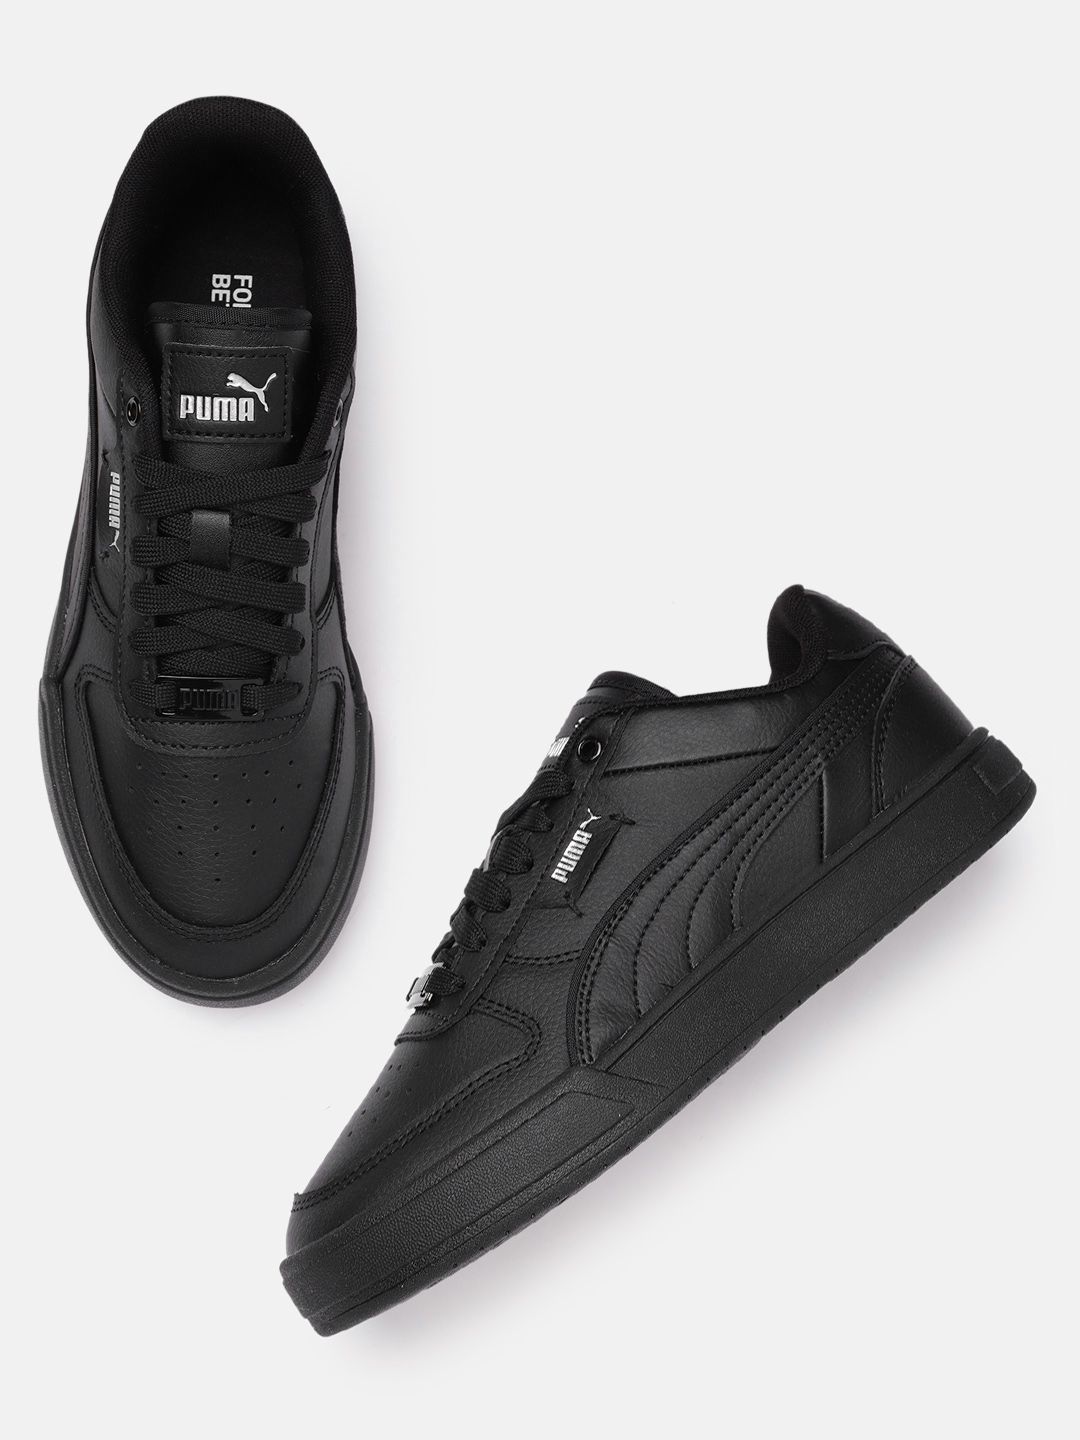 Puma Unisex Perforations Caven Dime Leather Sneakers Price in India